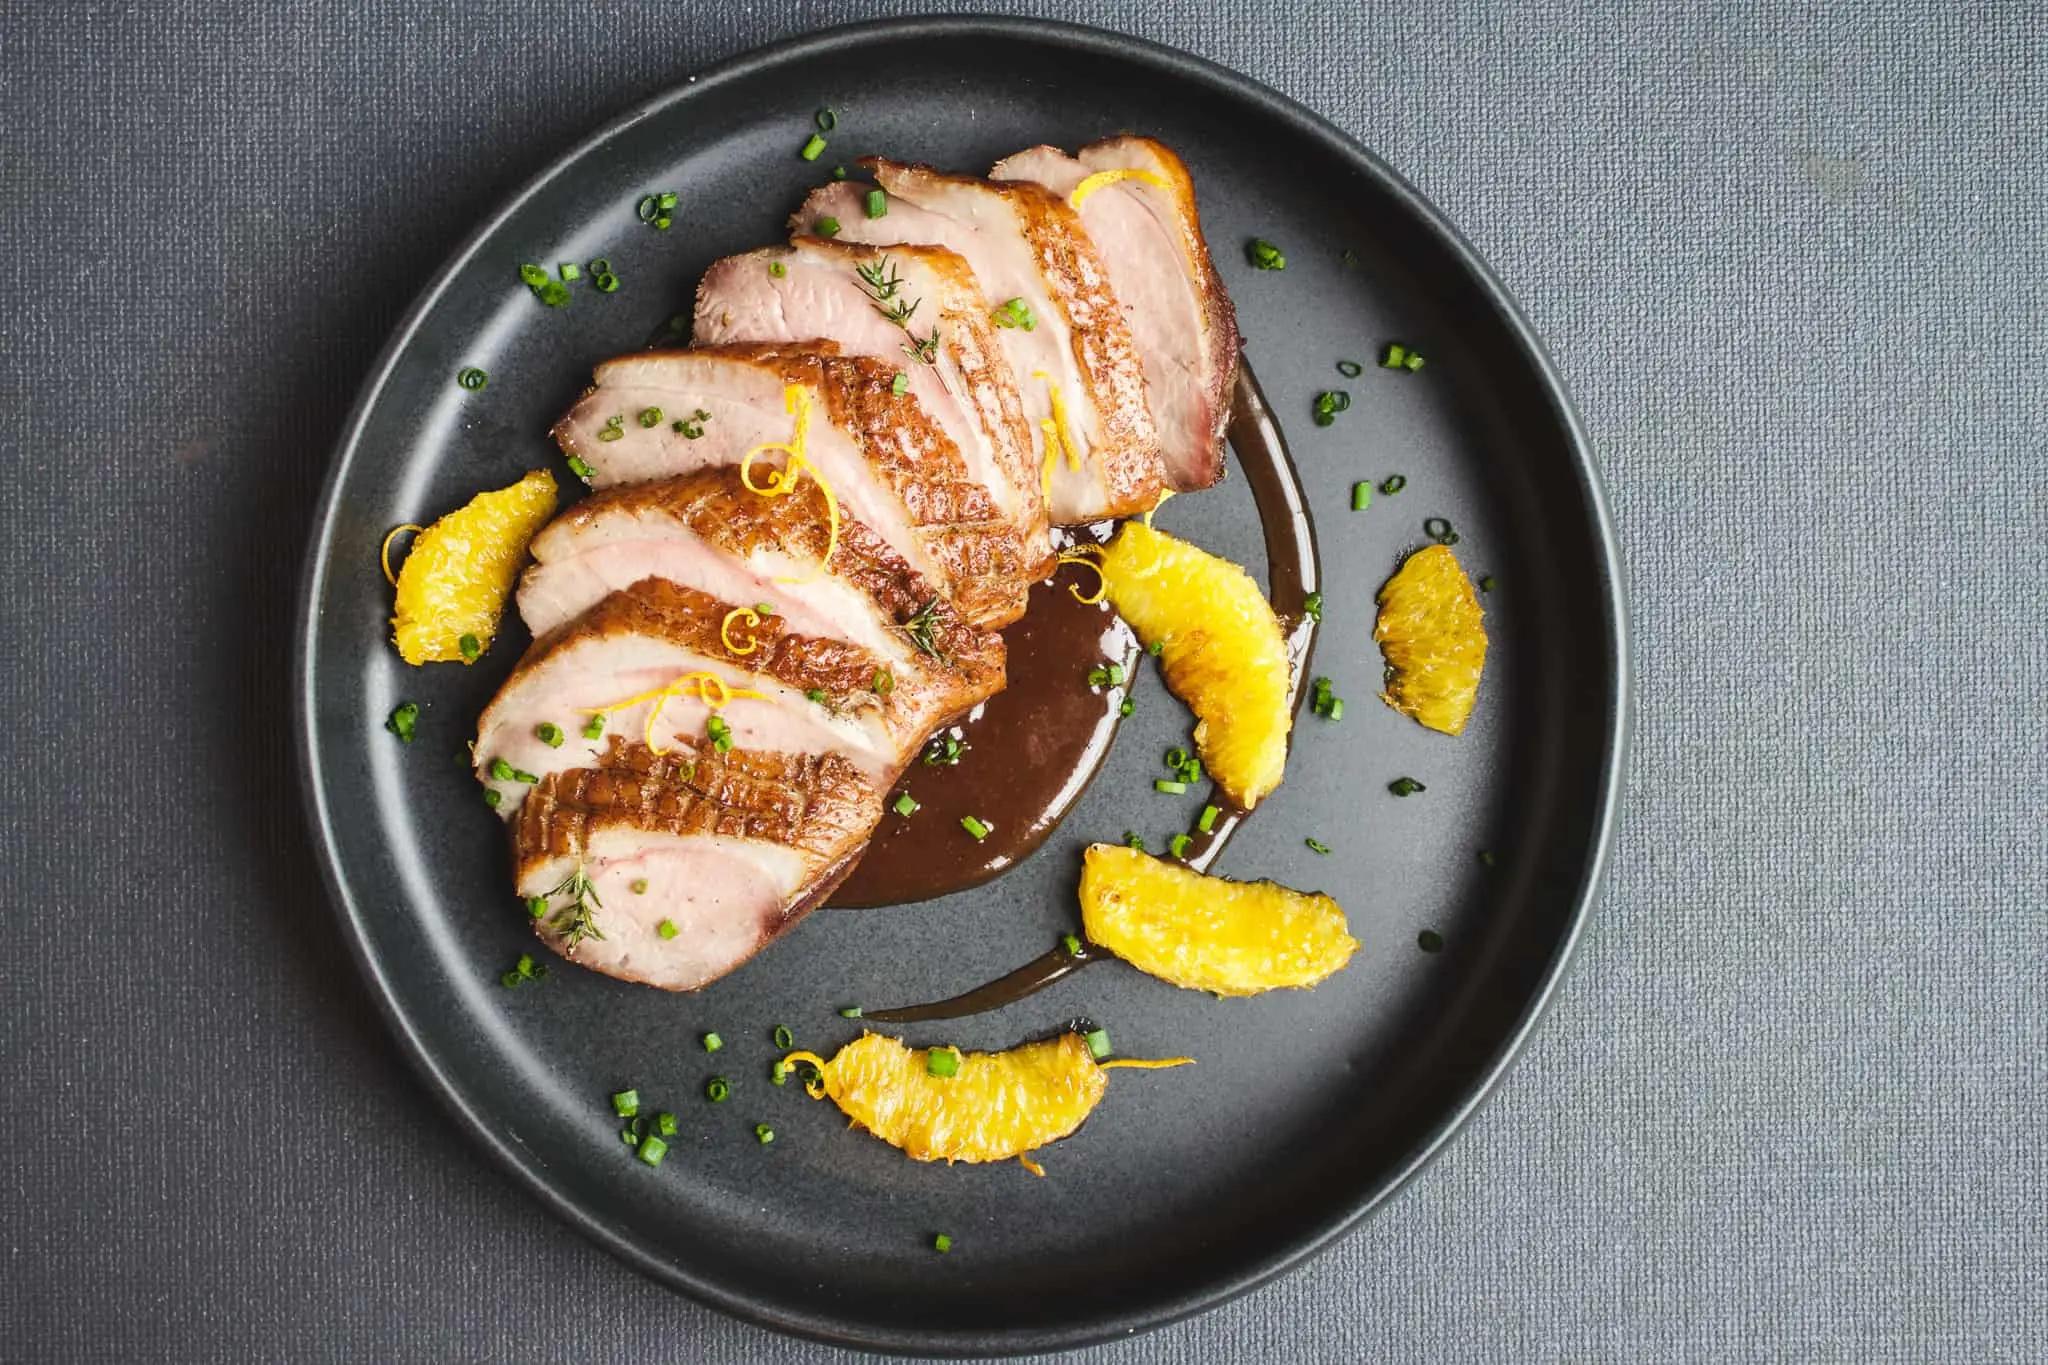 smoked duck with orange sauce - Why does duck go with orange